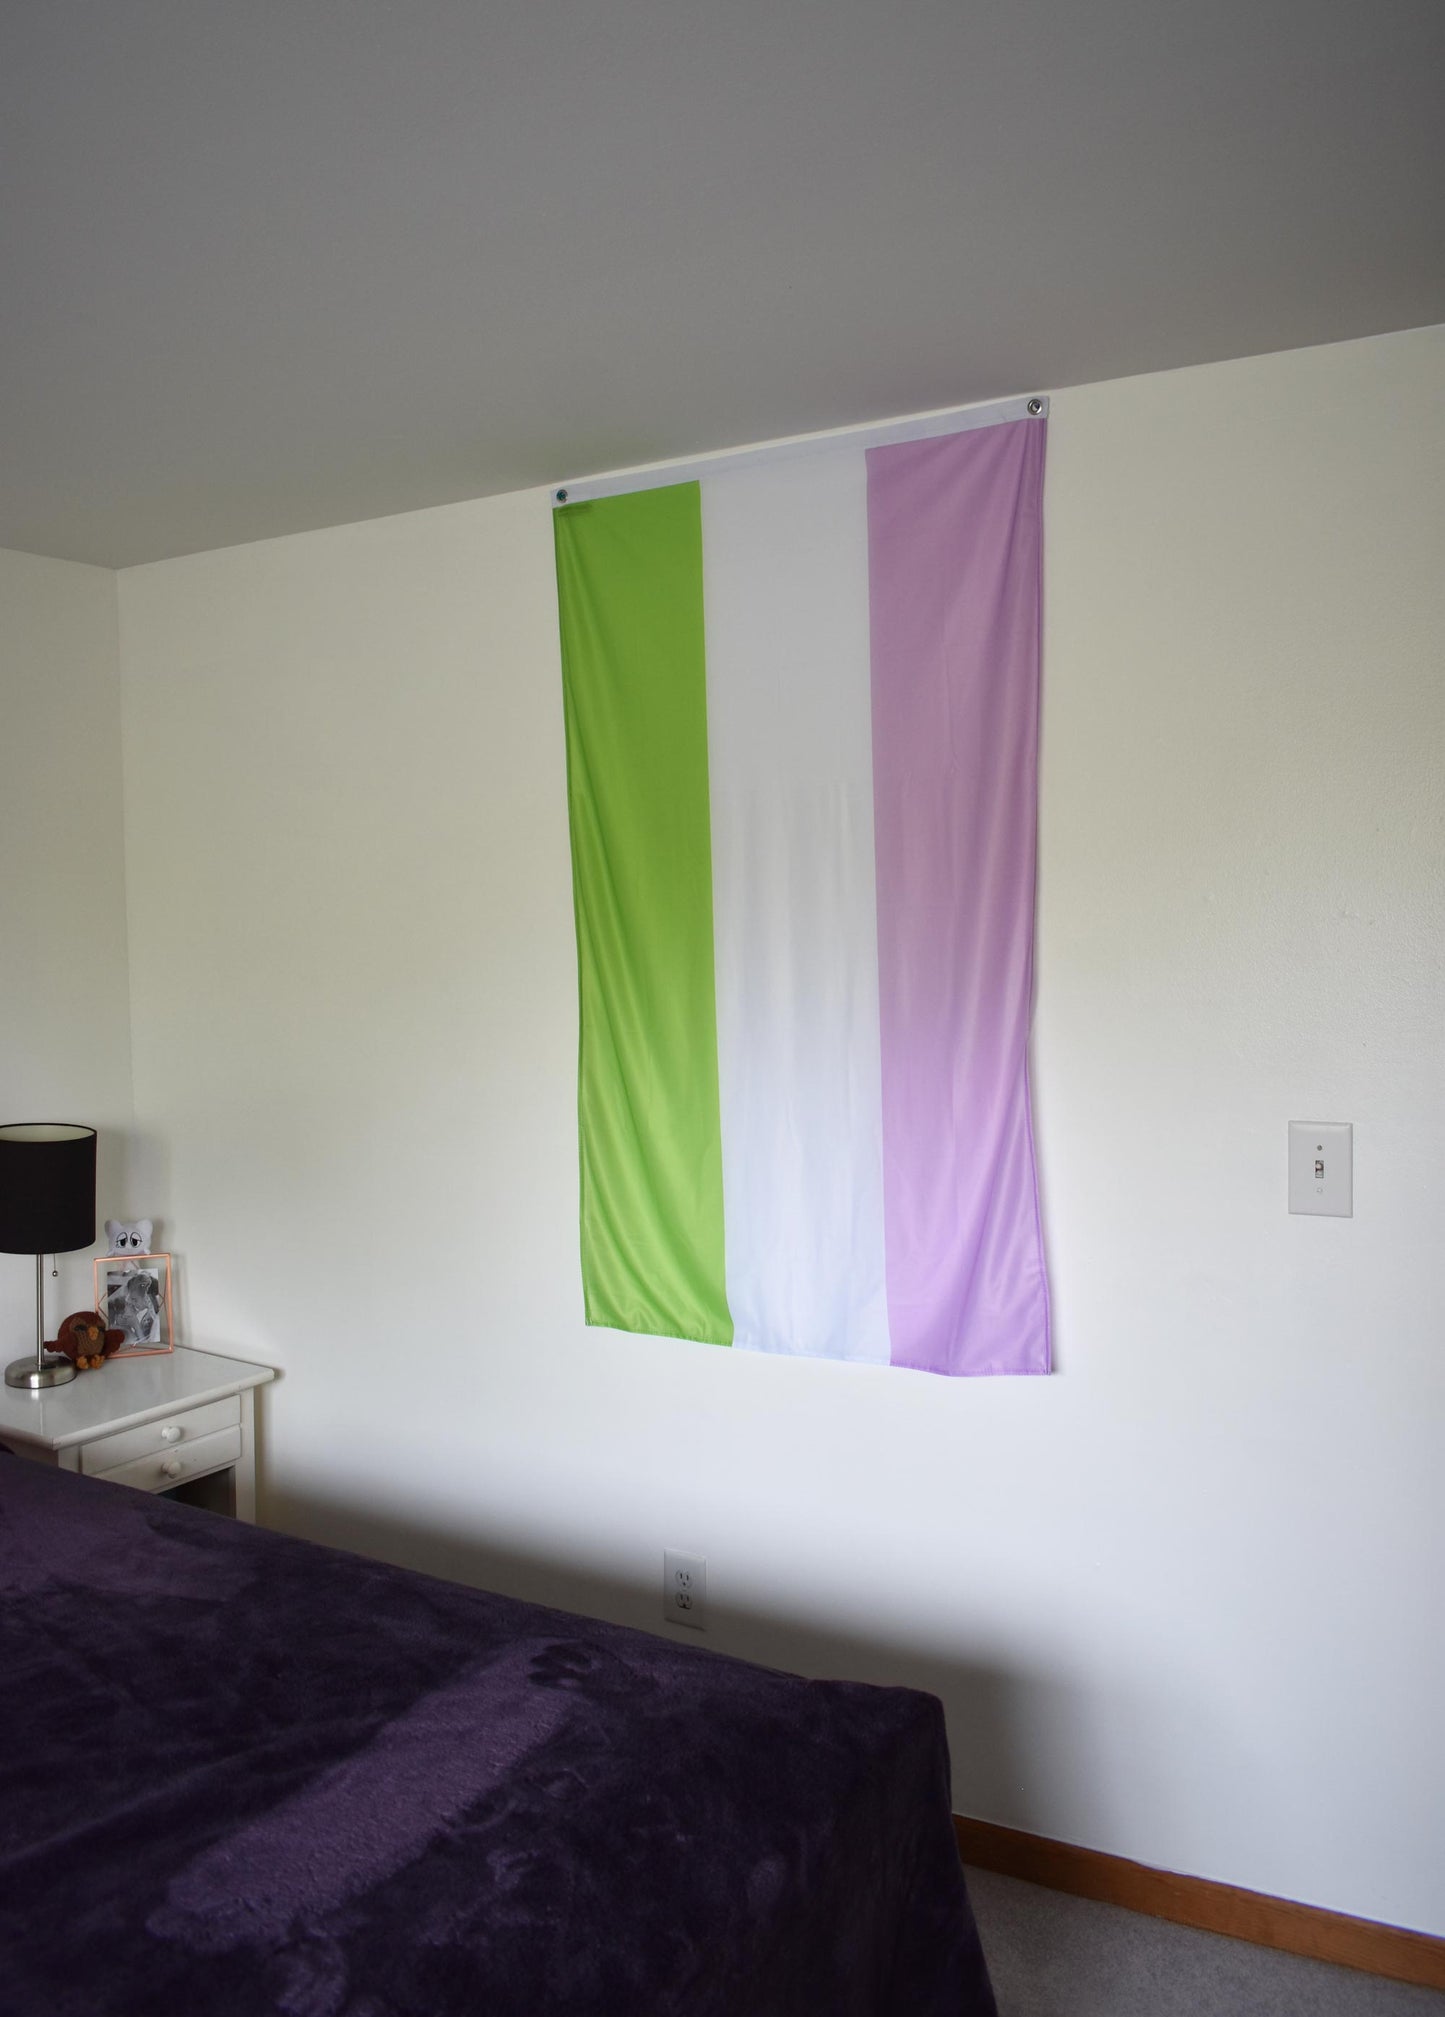 3’x5’ genderqueer flag hanging vertically on the wall of a bedroom with a nightstand and a bed